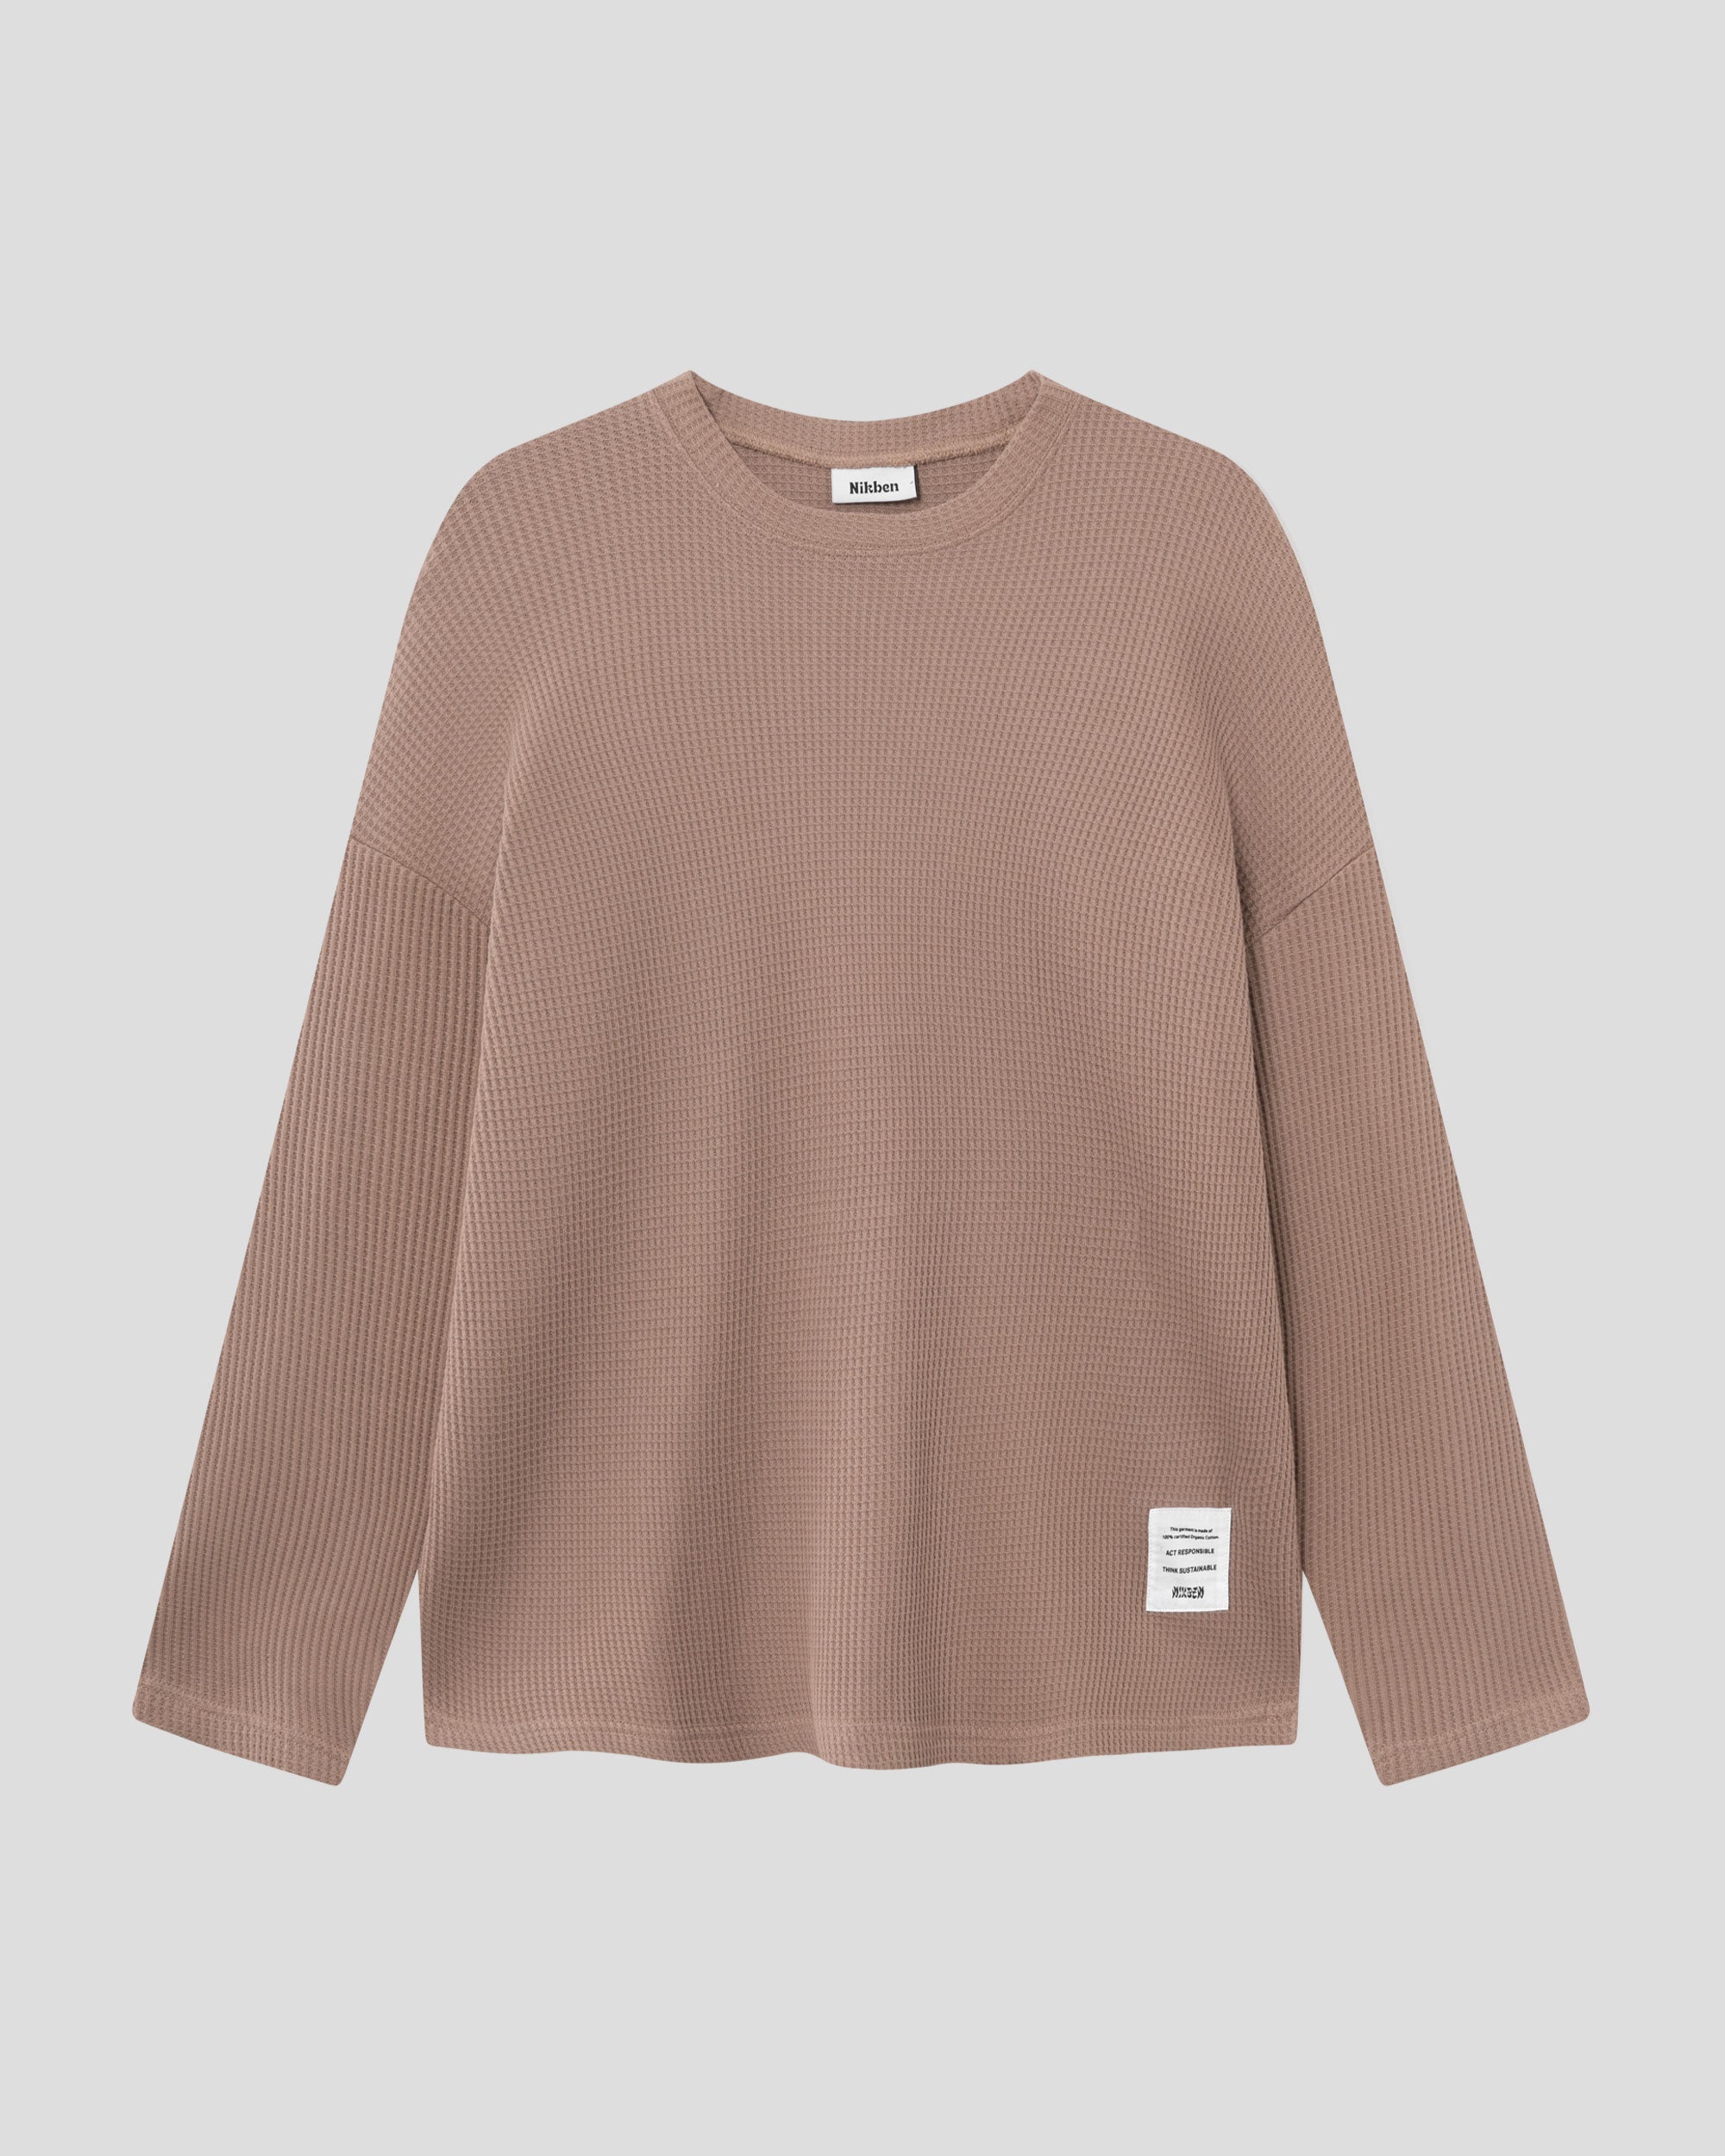 Brown waffle-patterned sweatshirt with a stitched-on material label.